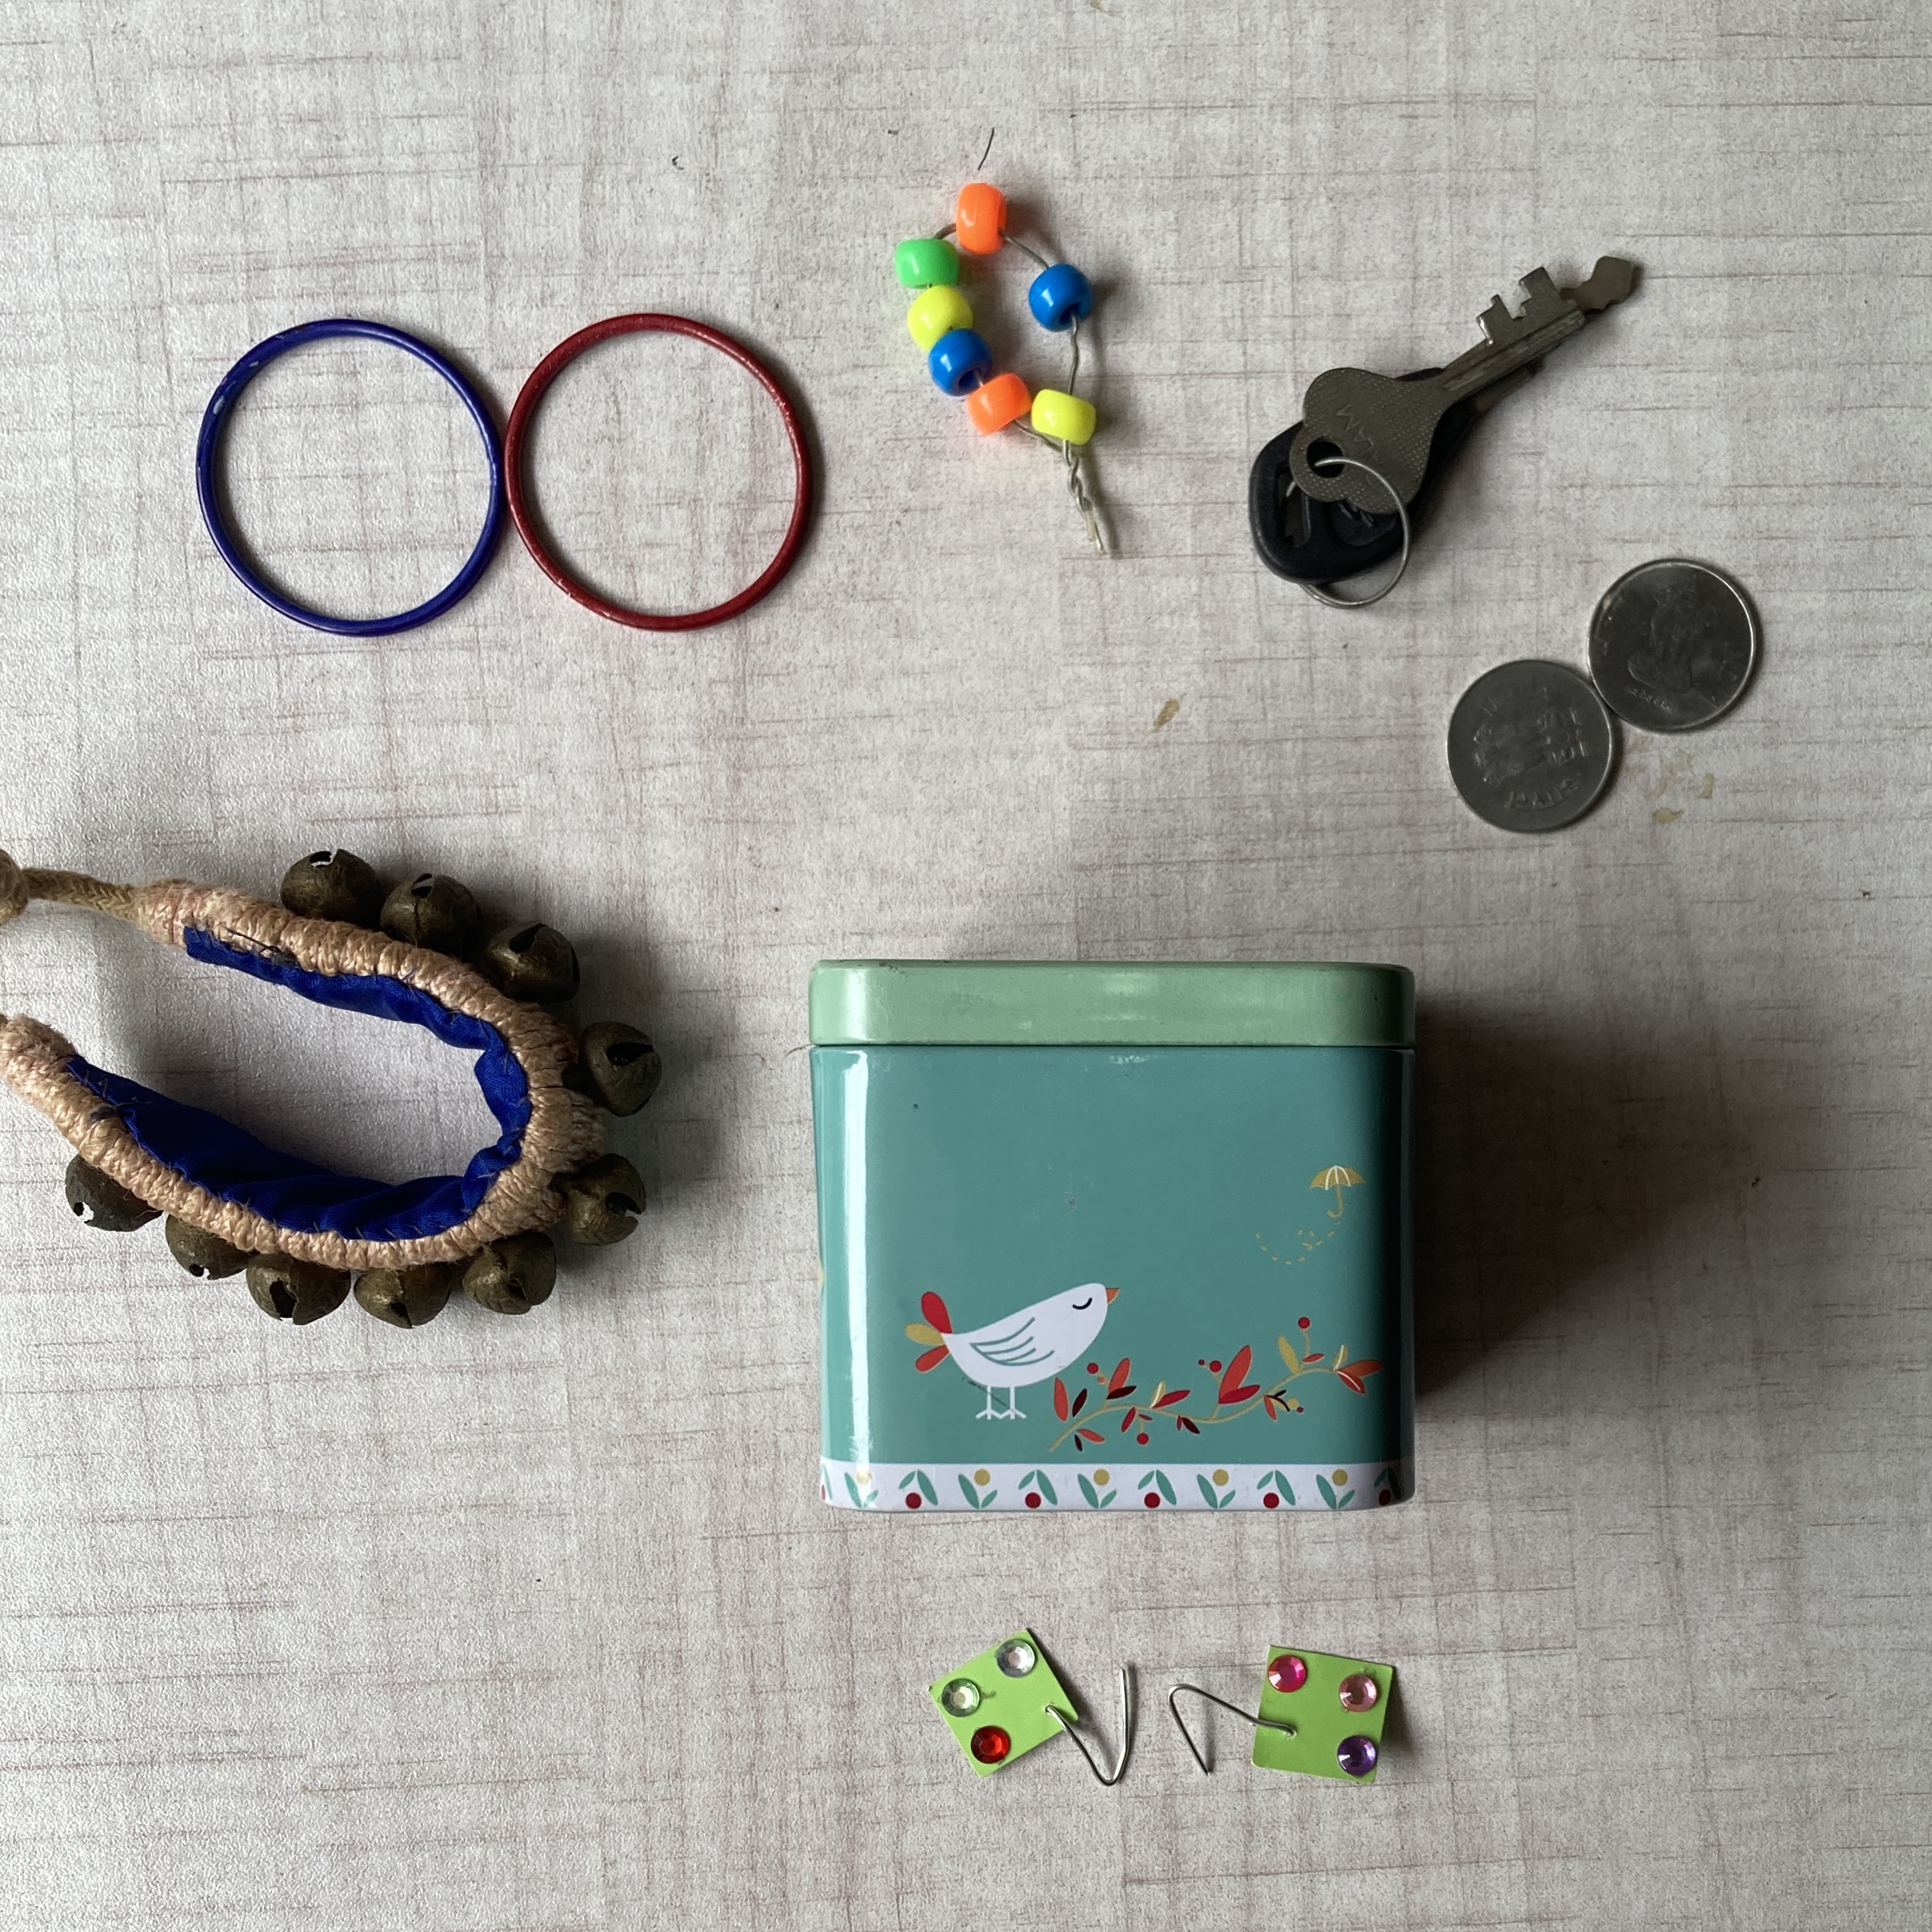 An image of the items in the box